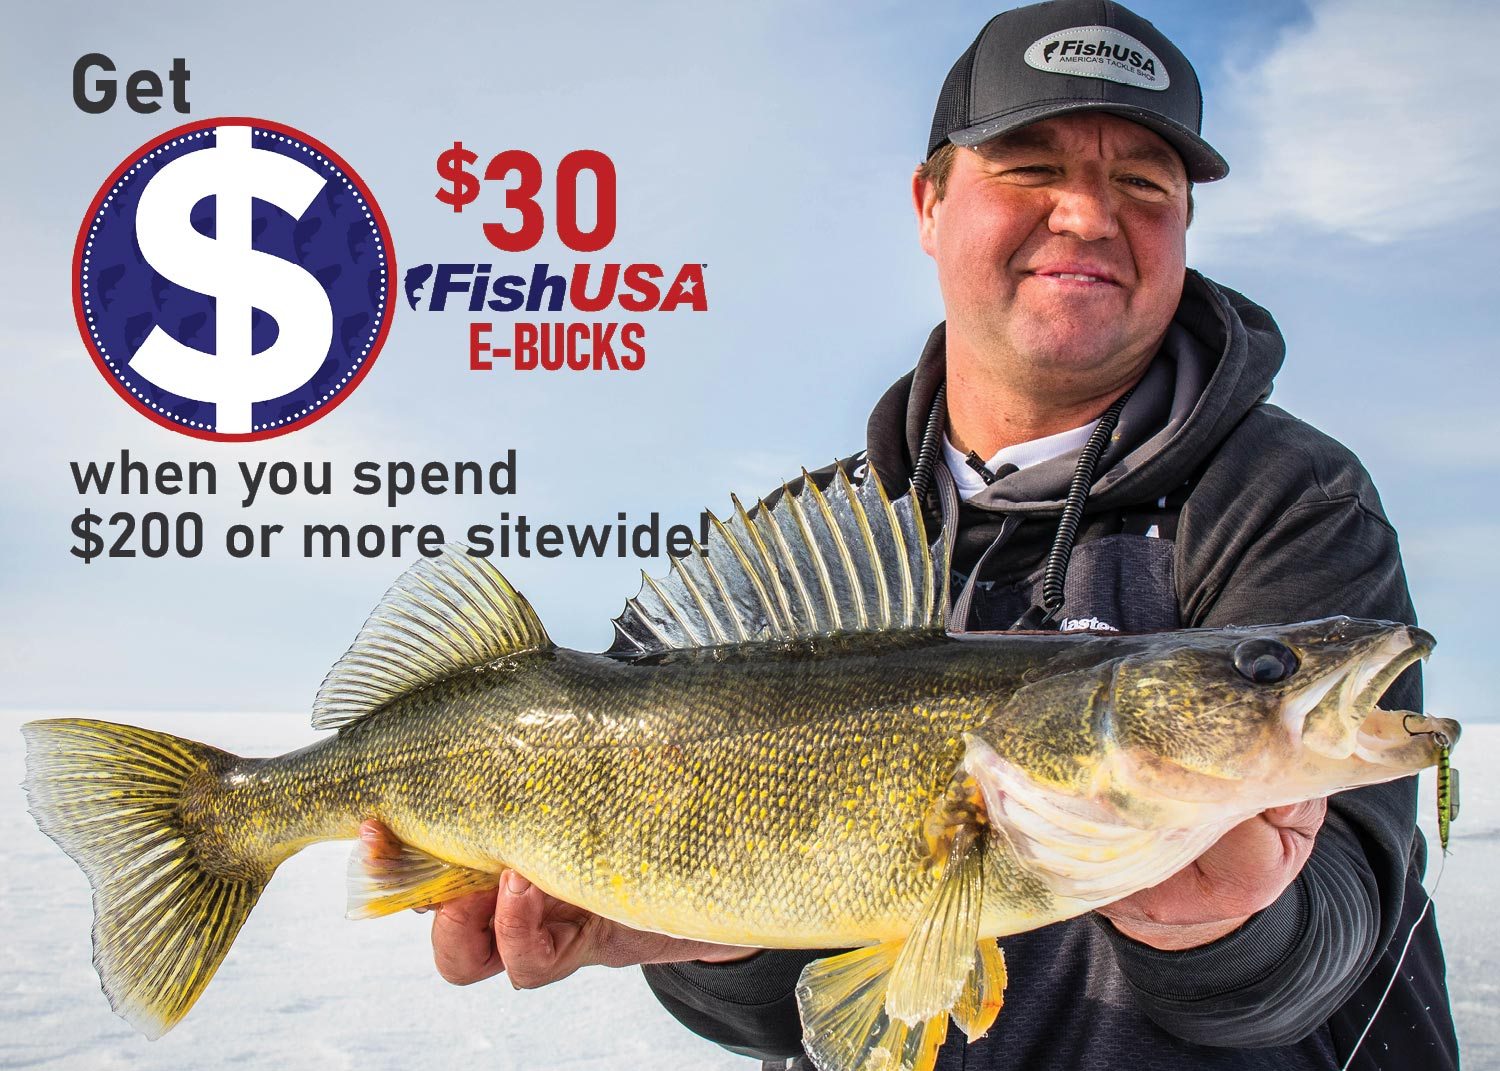 Spend $200 sitewide and earn $30 FishUSA E-Bucks for your next order!